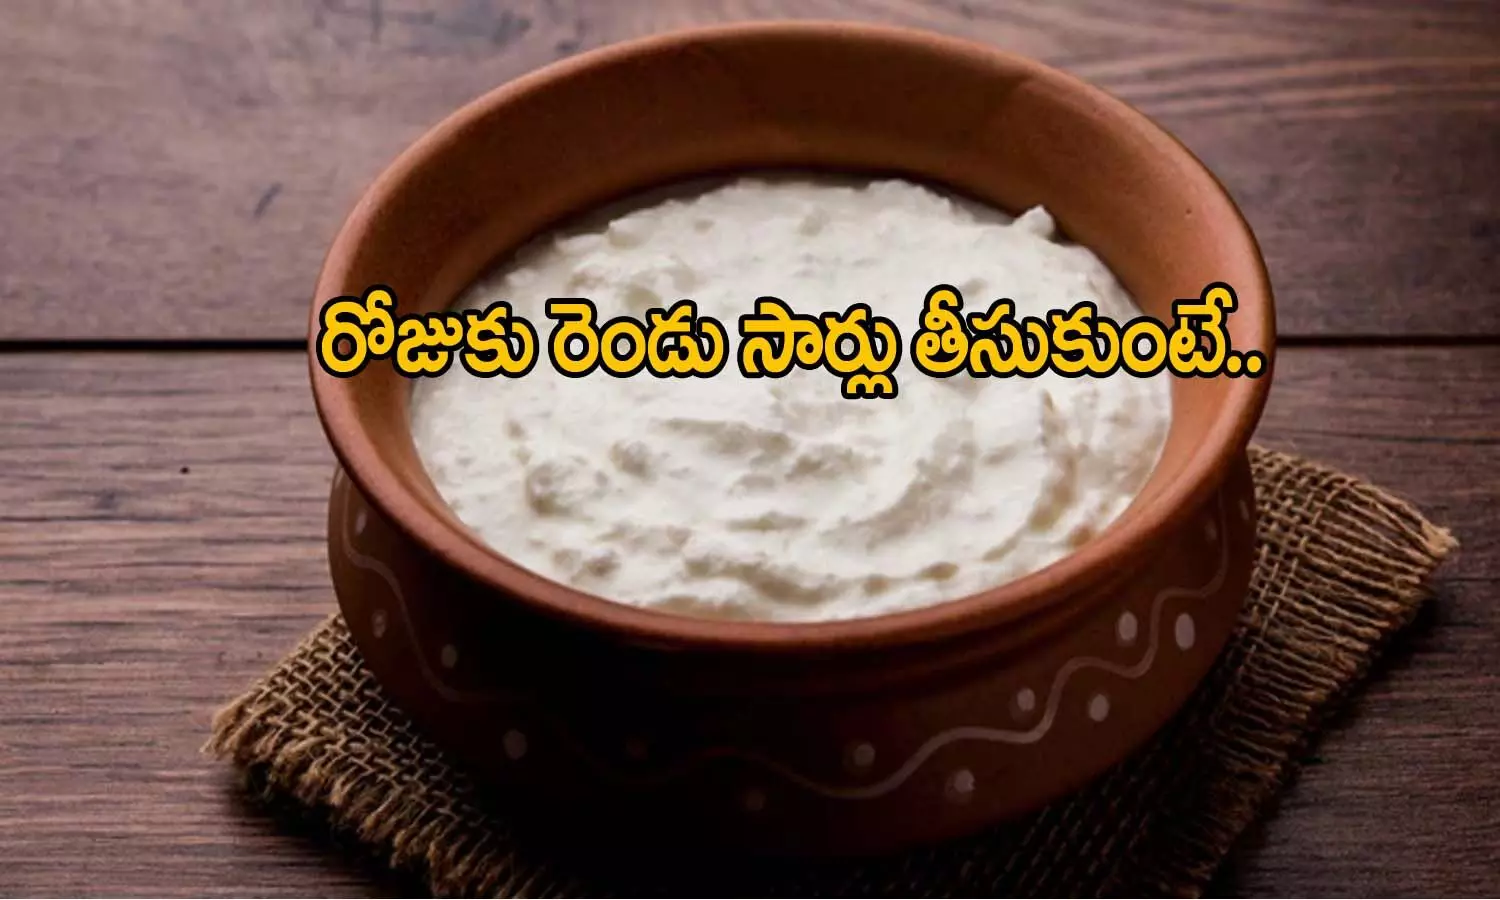 Health benefits of eating curd daily